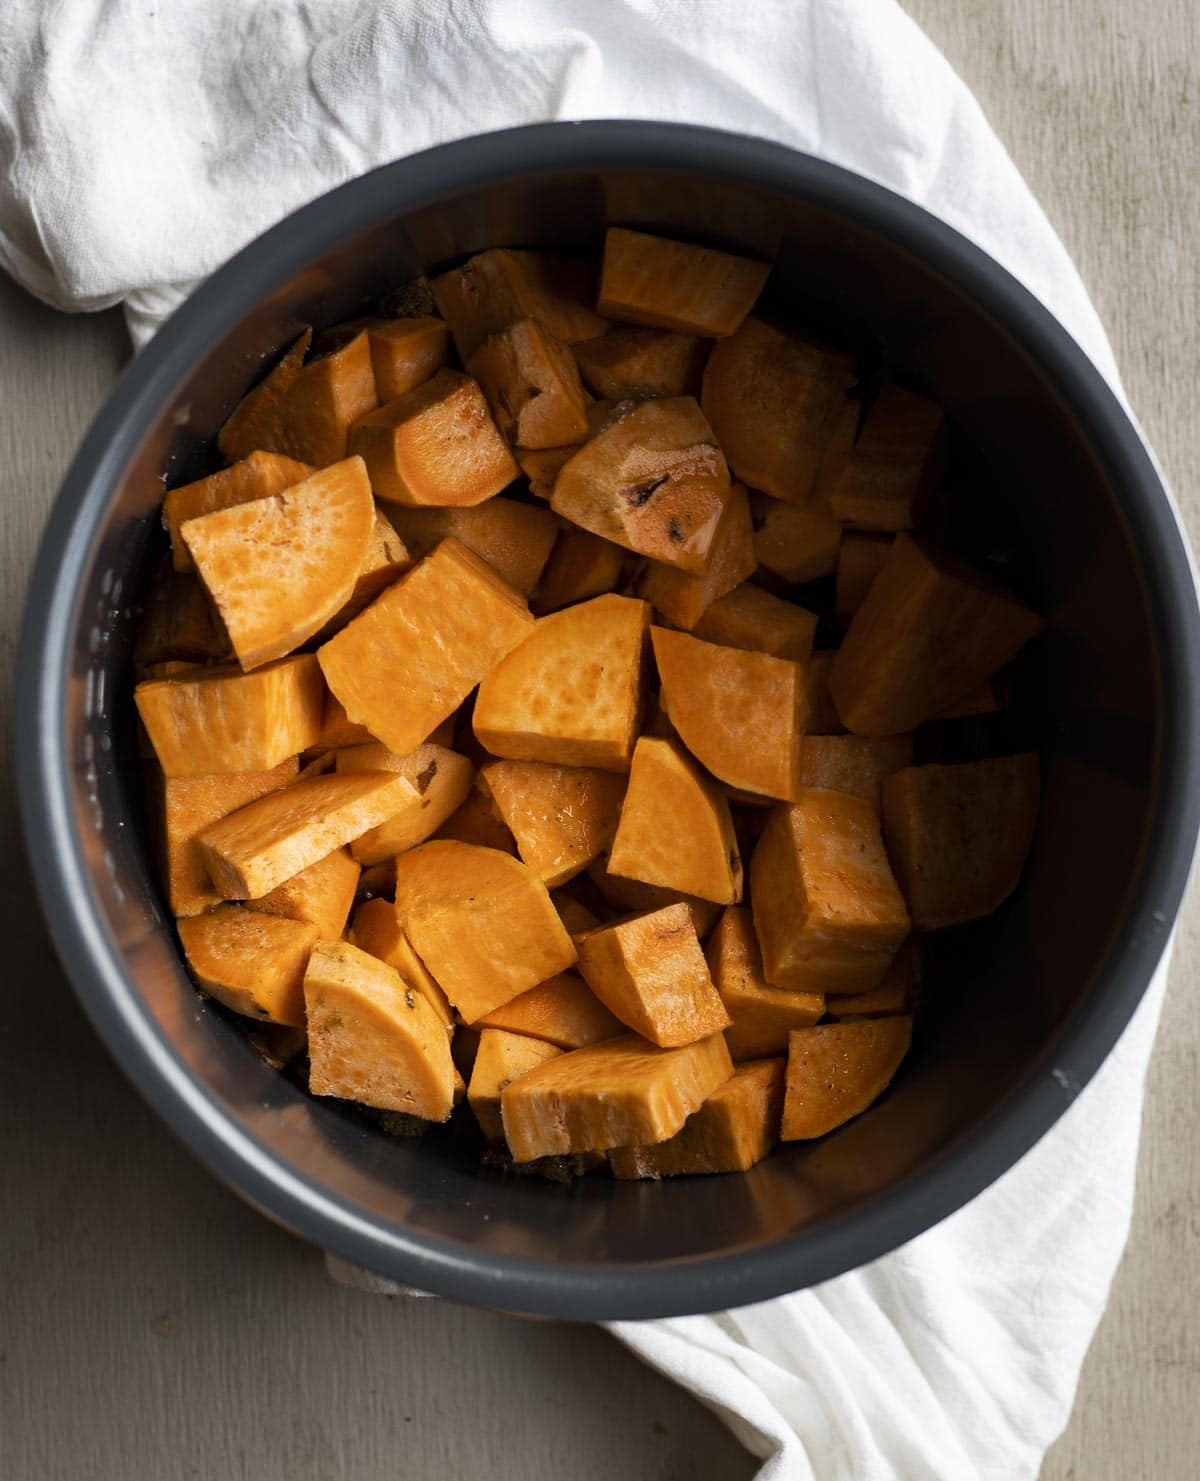 Cubed sweet potatoes in the Instant Pot insert.